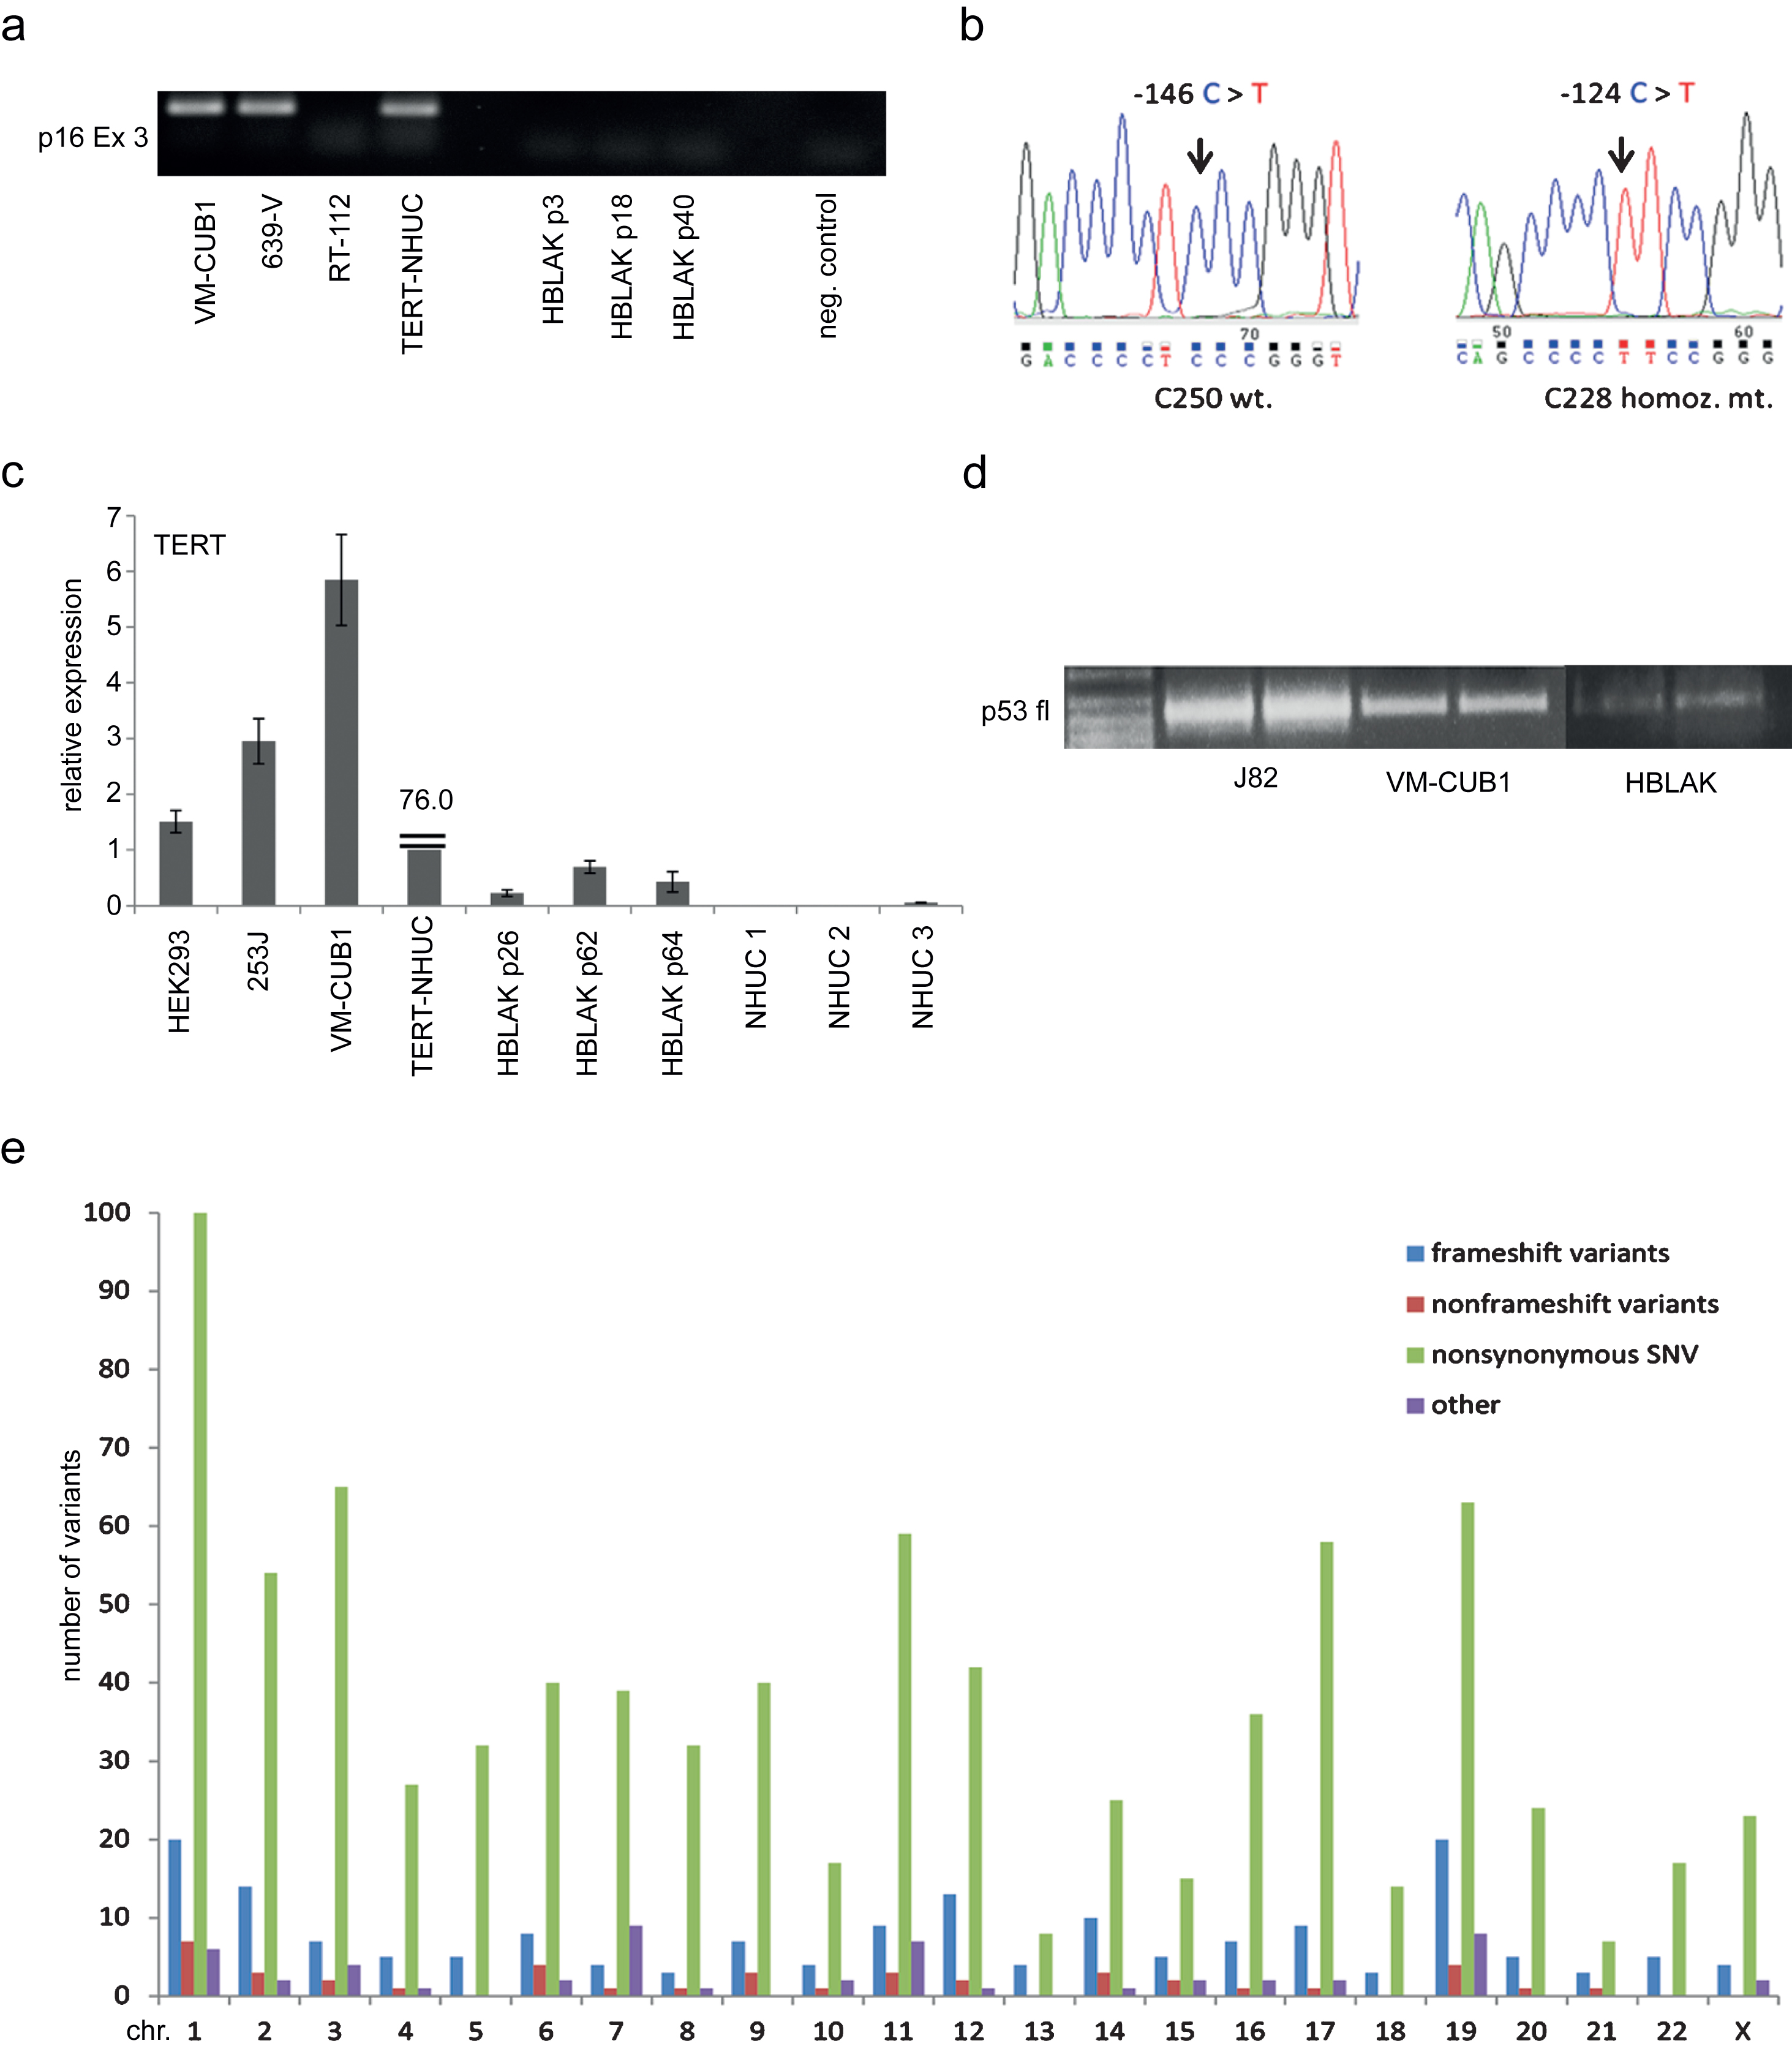 Characterization of genetic changes in HBLAK cells. (a) Deletion of CDKN2A/p16INK4 exon 3 confirmed by PCR amplification of genomic DNA of various HBLAK passages. Urothelial carcinoma cell lines retaining expression of p16INK4 (VM-CUB1, 639-V) and experimentally immortalized normal NHUC cells (TERT-NHUC) served as positive controls. The UC cell line RT-112 with a homozygous deletion of CDKN2A served as a negative control. (b) Sanger sequencing revealed the most common TERT promoter mutation (C228T) in HBLAK, whereas C250 was retained. (c) TERT mRNA expression was determined by real time qRT-PCR in different passages of HBLAK cells compared to non-immortalized NHUC cells of different patients, TERT-NHUC and further cell lines with wildtype (HEK293, 253J) and mutant (VM-CUB1) TERT promoter. TBP was used as a reference gene. Note that TERT expression in TERT-NHUC is much higher than that of all other cell lines (76.0). (d) The full-length transcript of p53 was detectable in HBLAK by RT-PCR, but weakly expressed compared to urothelial carcinoma cell lines J82 and VM-CUB1. The amplification product was used for subsequent Sanger sequencing of the amplicon revealing that HBLAK cells contain wildtype p53. Left lane: size markers. (e) Overview of variant frequency by chromosome in HBLAK cells compared to the hg19 reference genome per chromosome as detected by exome sequencing. For each chromosome, frameshift (blue), nonframeshift (red), and nonsynonymous (green) variants are indicated. Other types are detailed in Table 4 and all variants are listed individually in supplementary file, sheet 2.